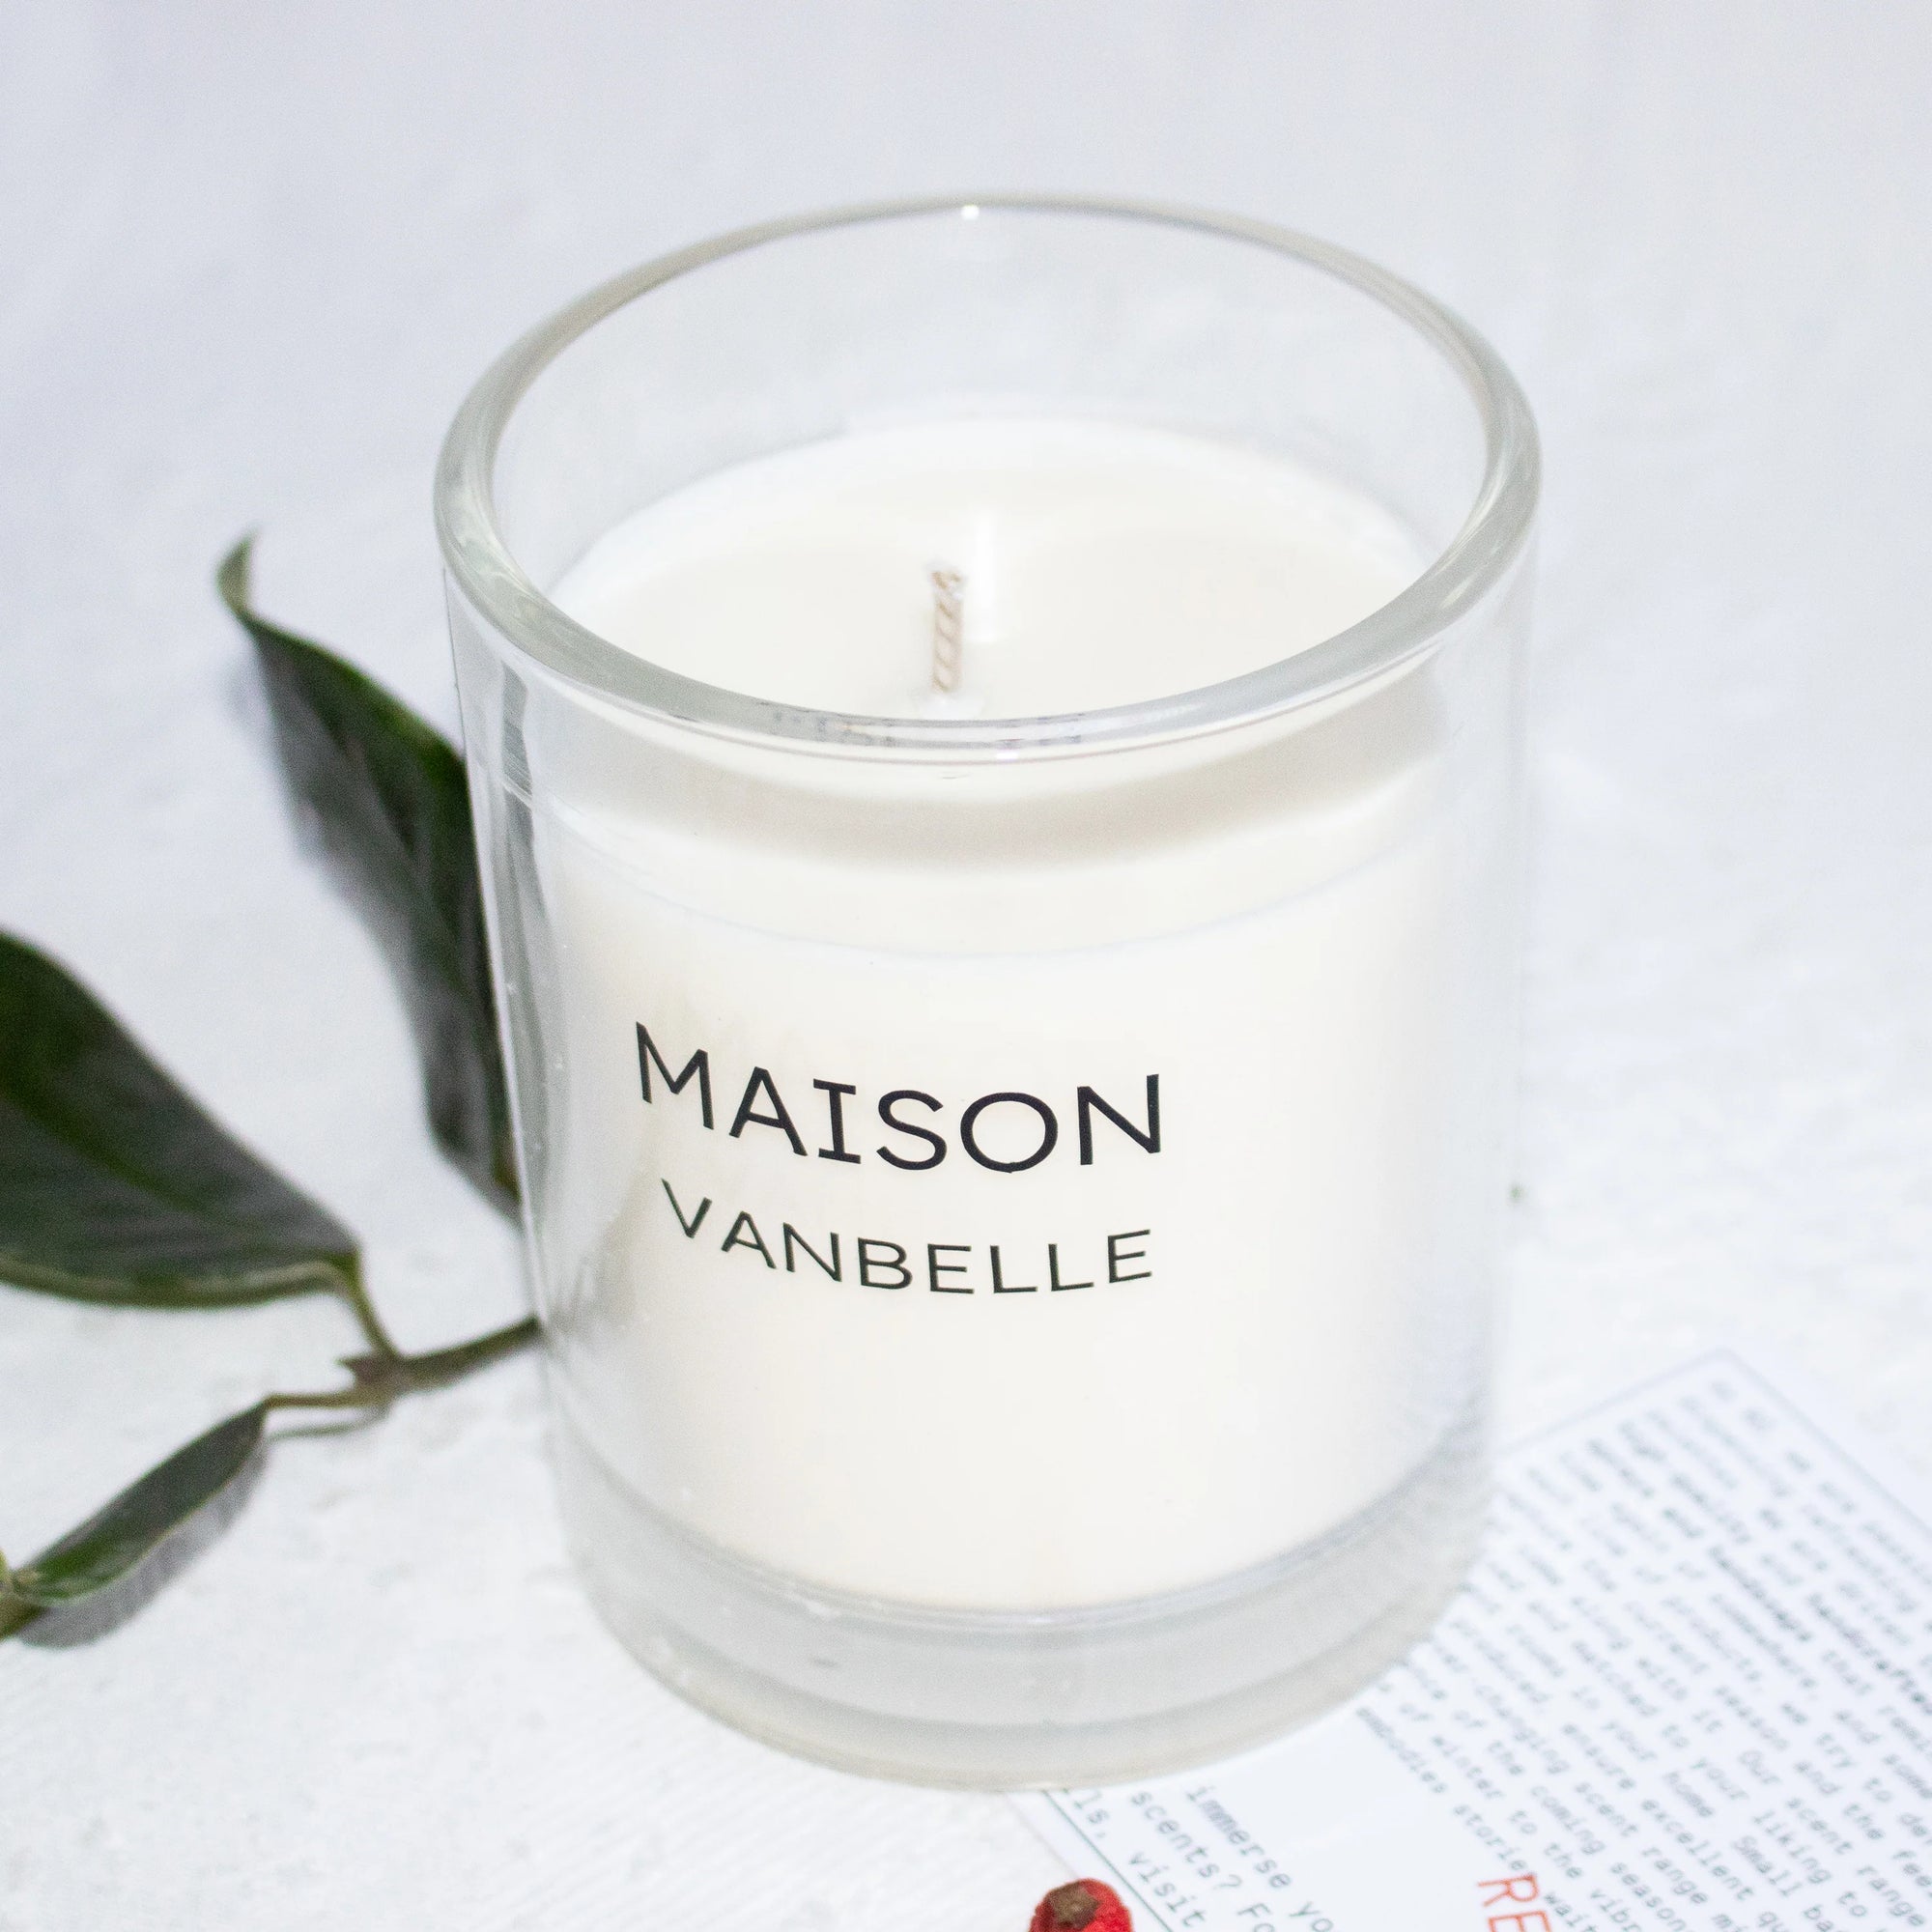 PICTURE THIS: your name on a cozy candle